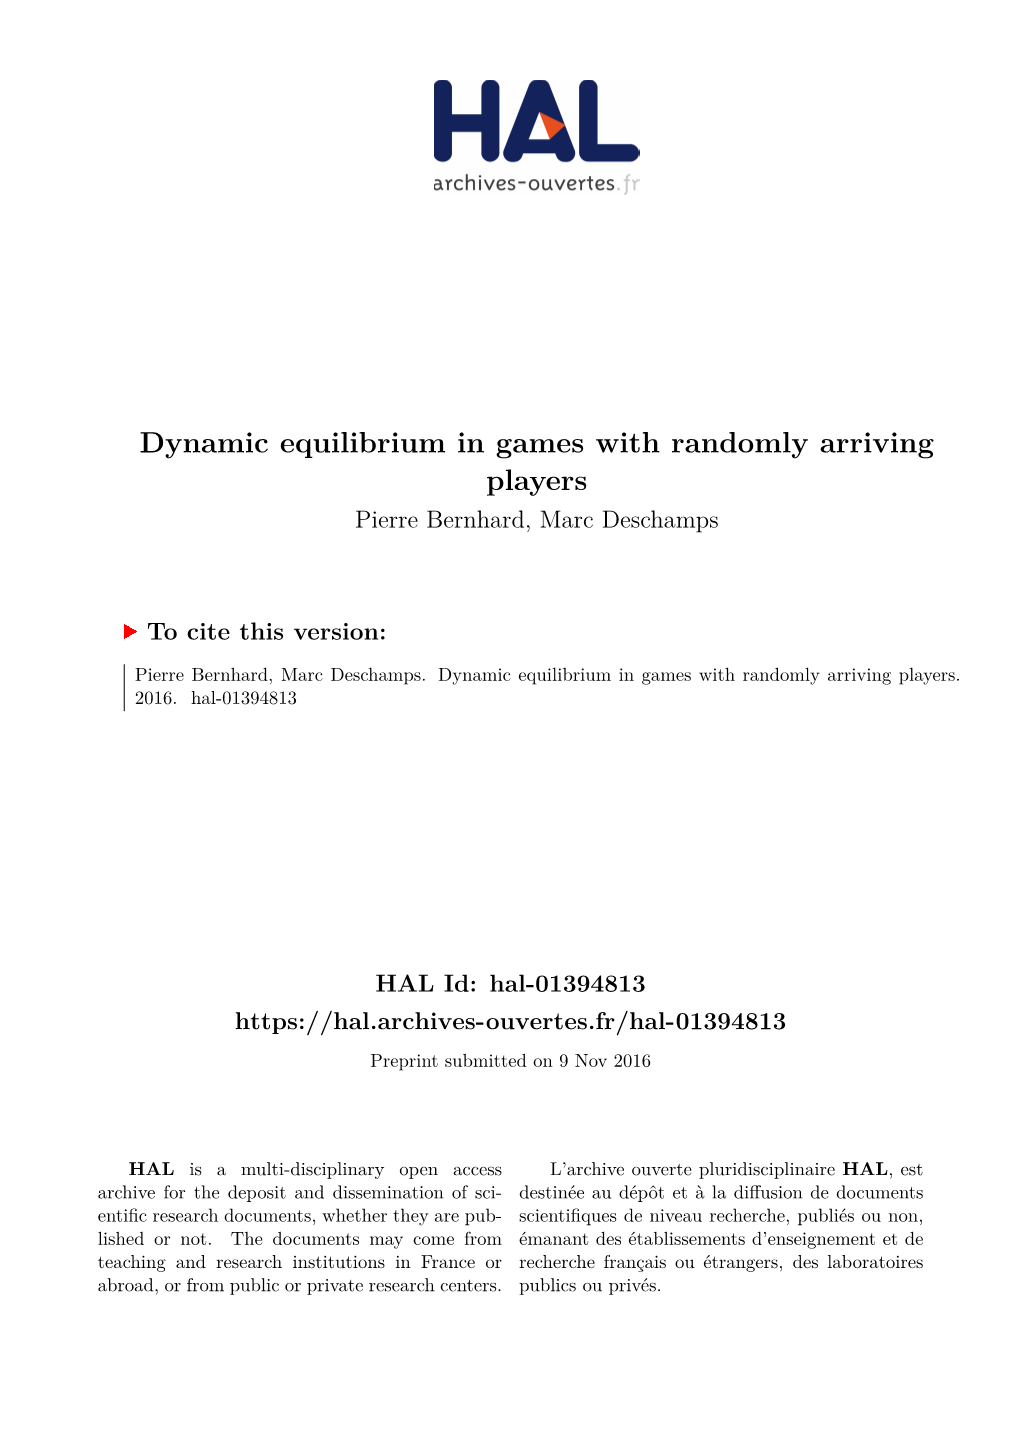 Dynamic Equilibrium in Games with Randomly Arriving Players Pierre Bernhard, Marc Deschamps